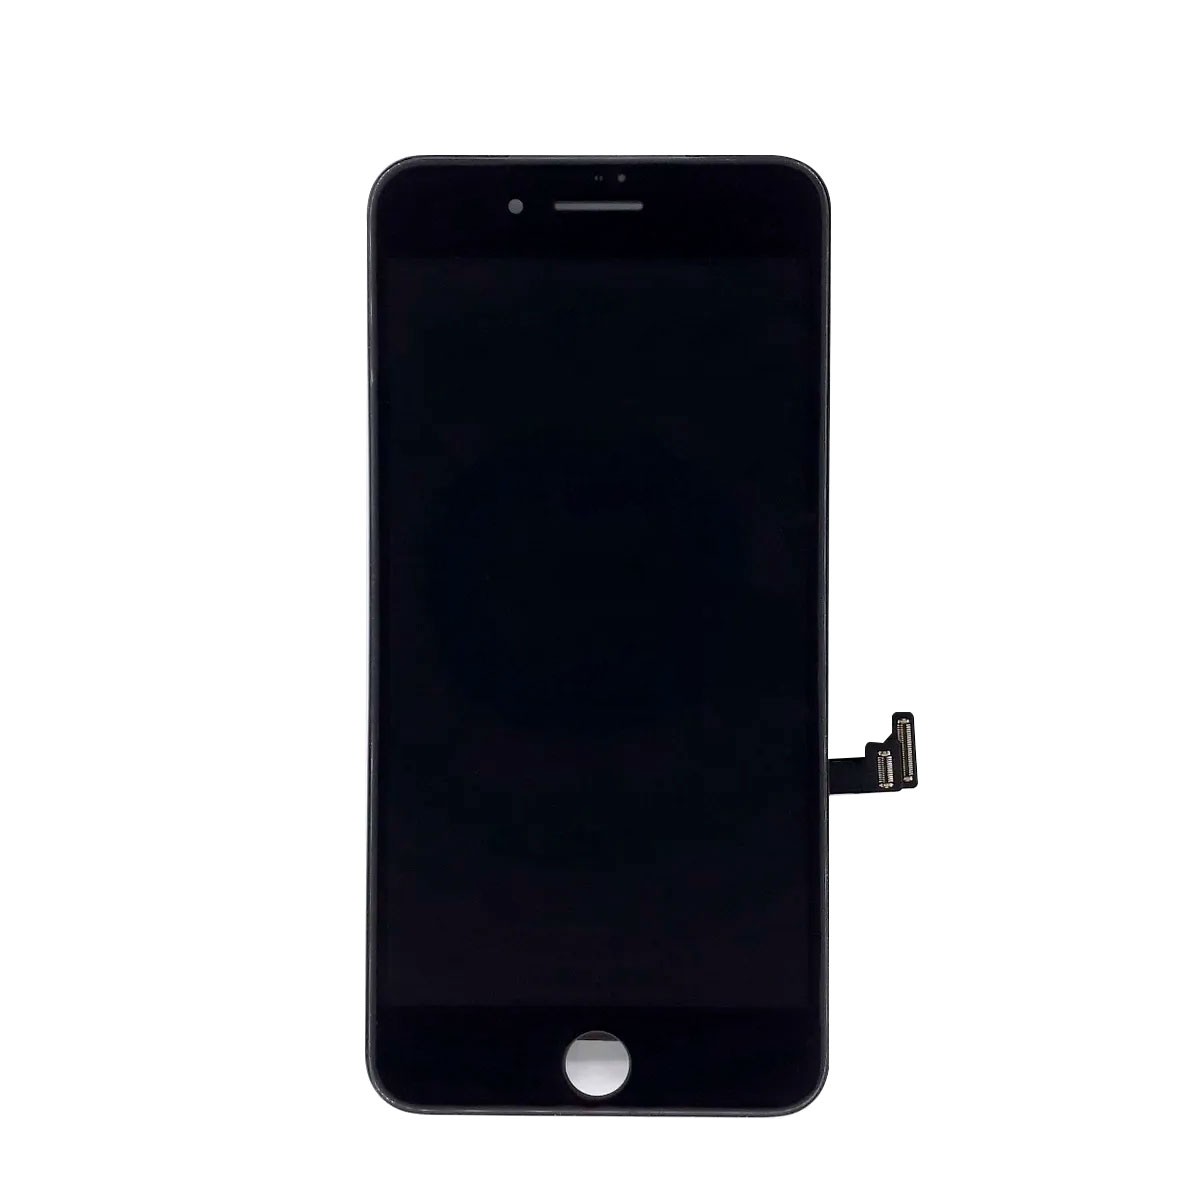 Tela Touch Display LCD Frontal para iPhone 8 Plus